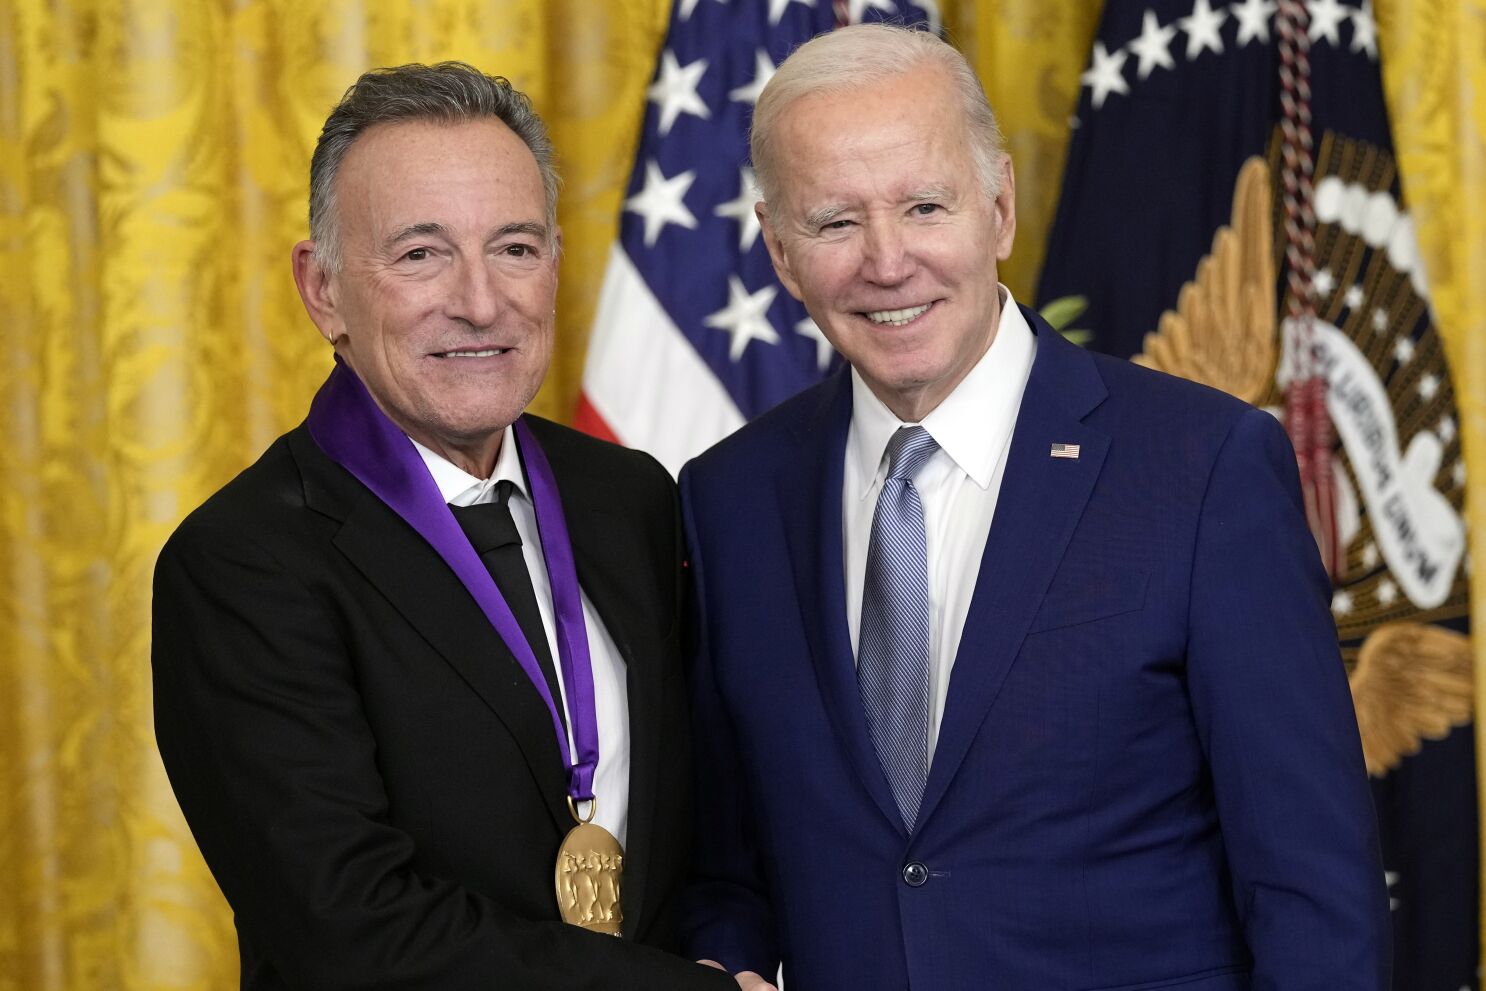 Springsteen, Kaling, among 22 honored by Biden The San Diego Union-Tribune